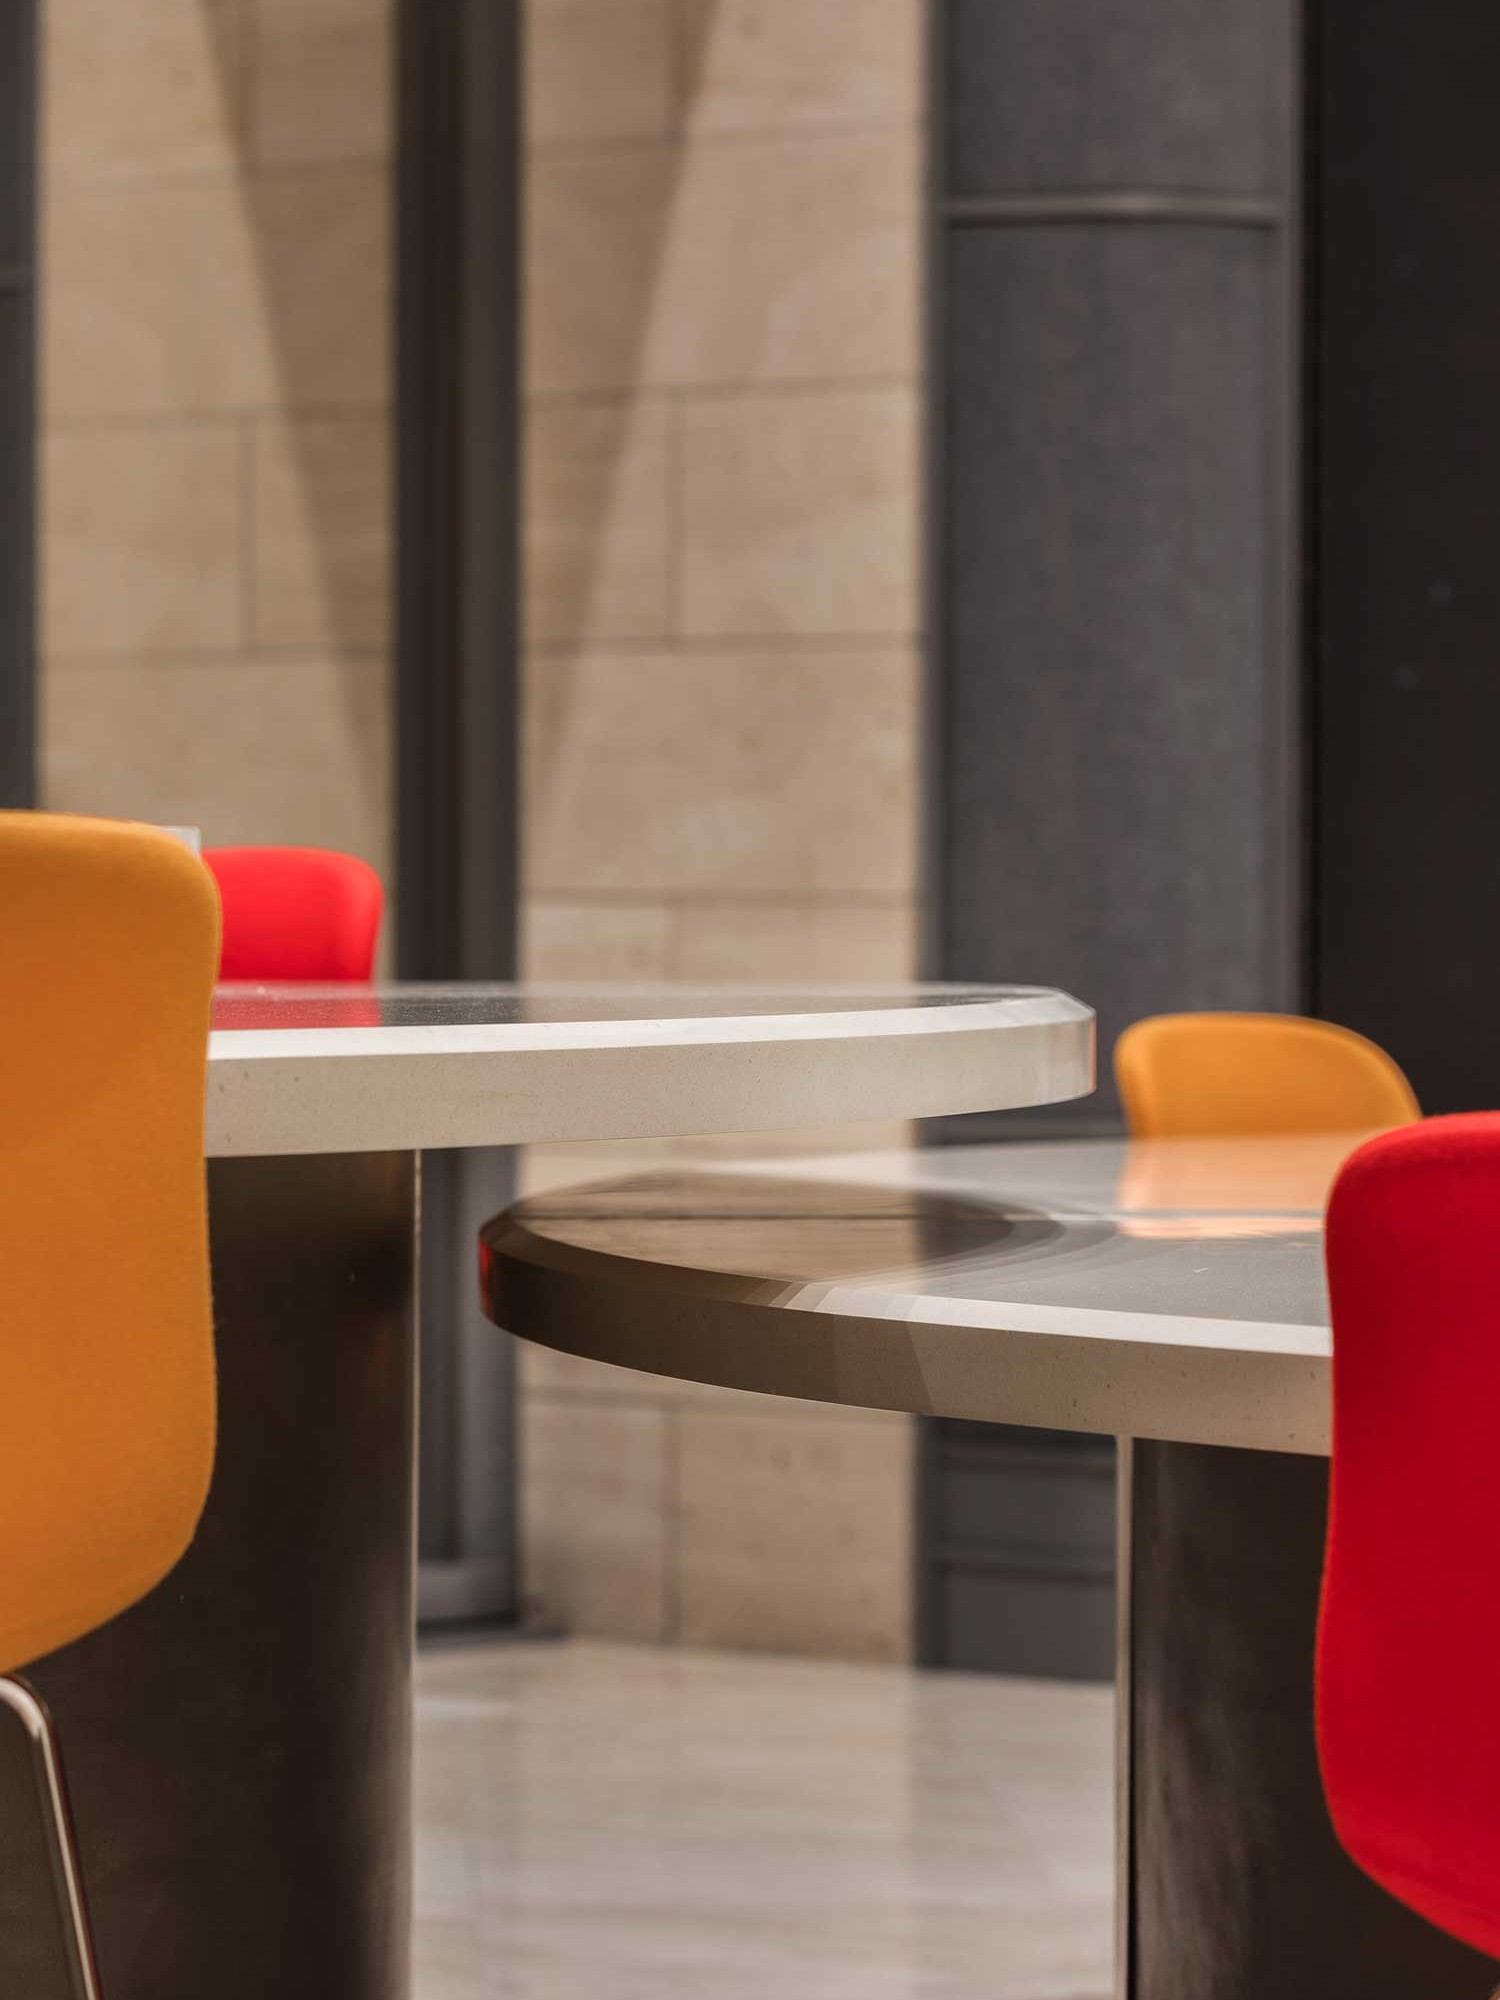 Keany Interiors: Commercial Design Project for Mastercard's Global HQ Lobby